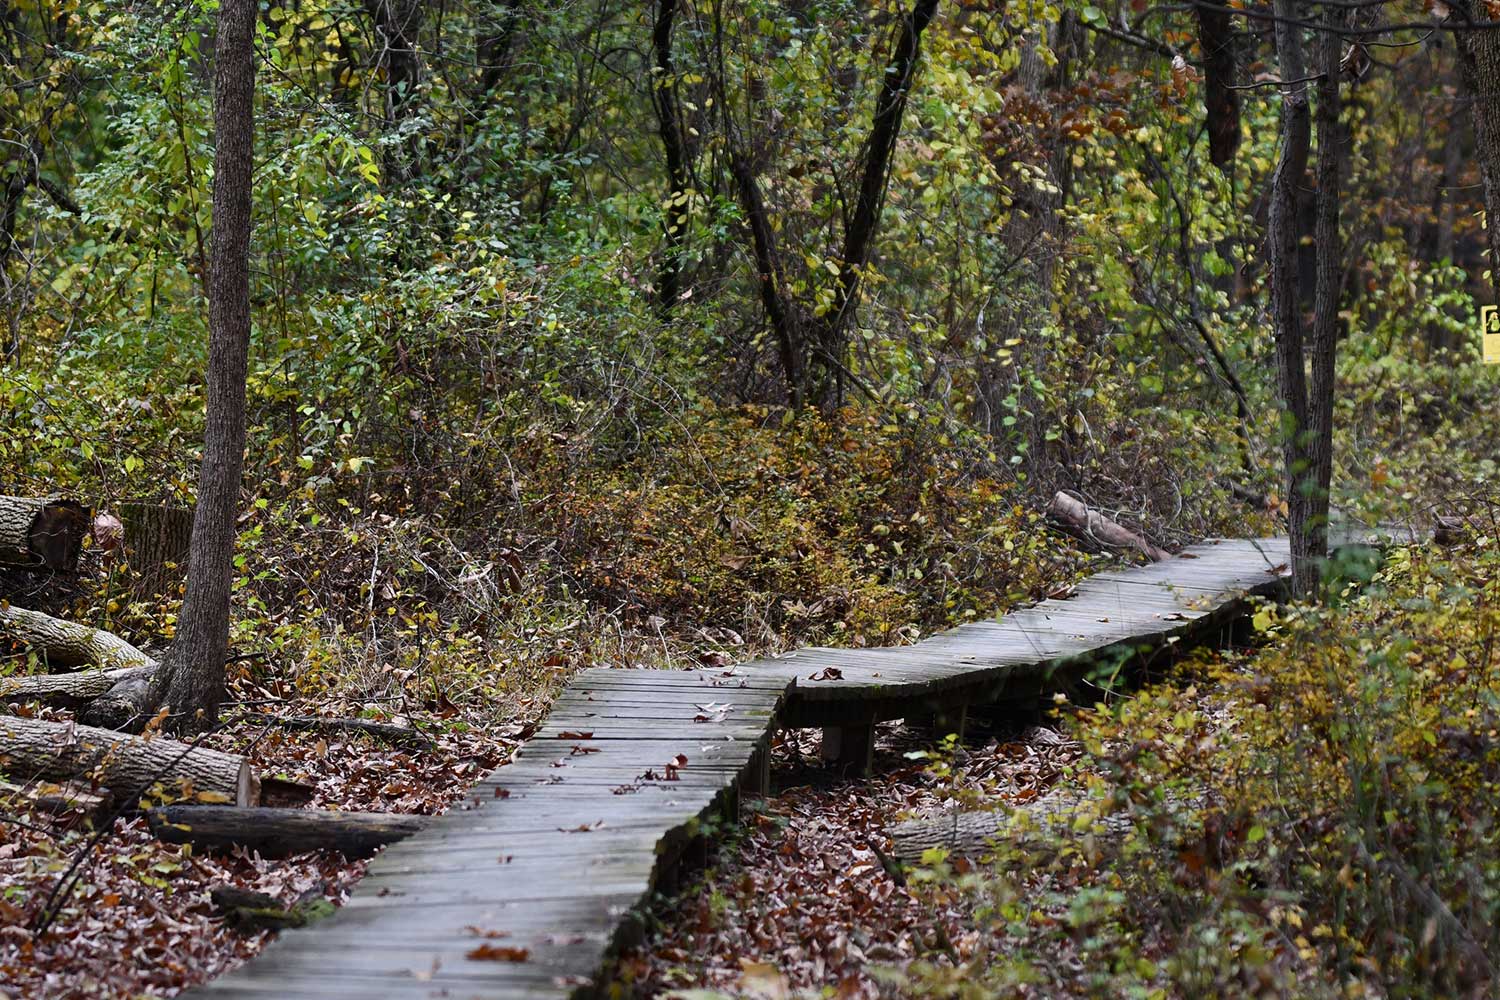 A wooden boardwalk cutting through a forest with fallen leaves covering the forest floor.